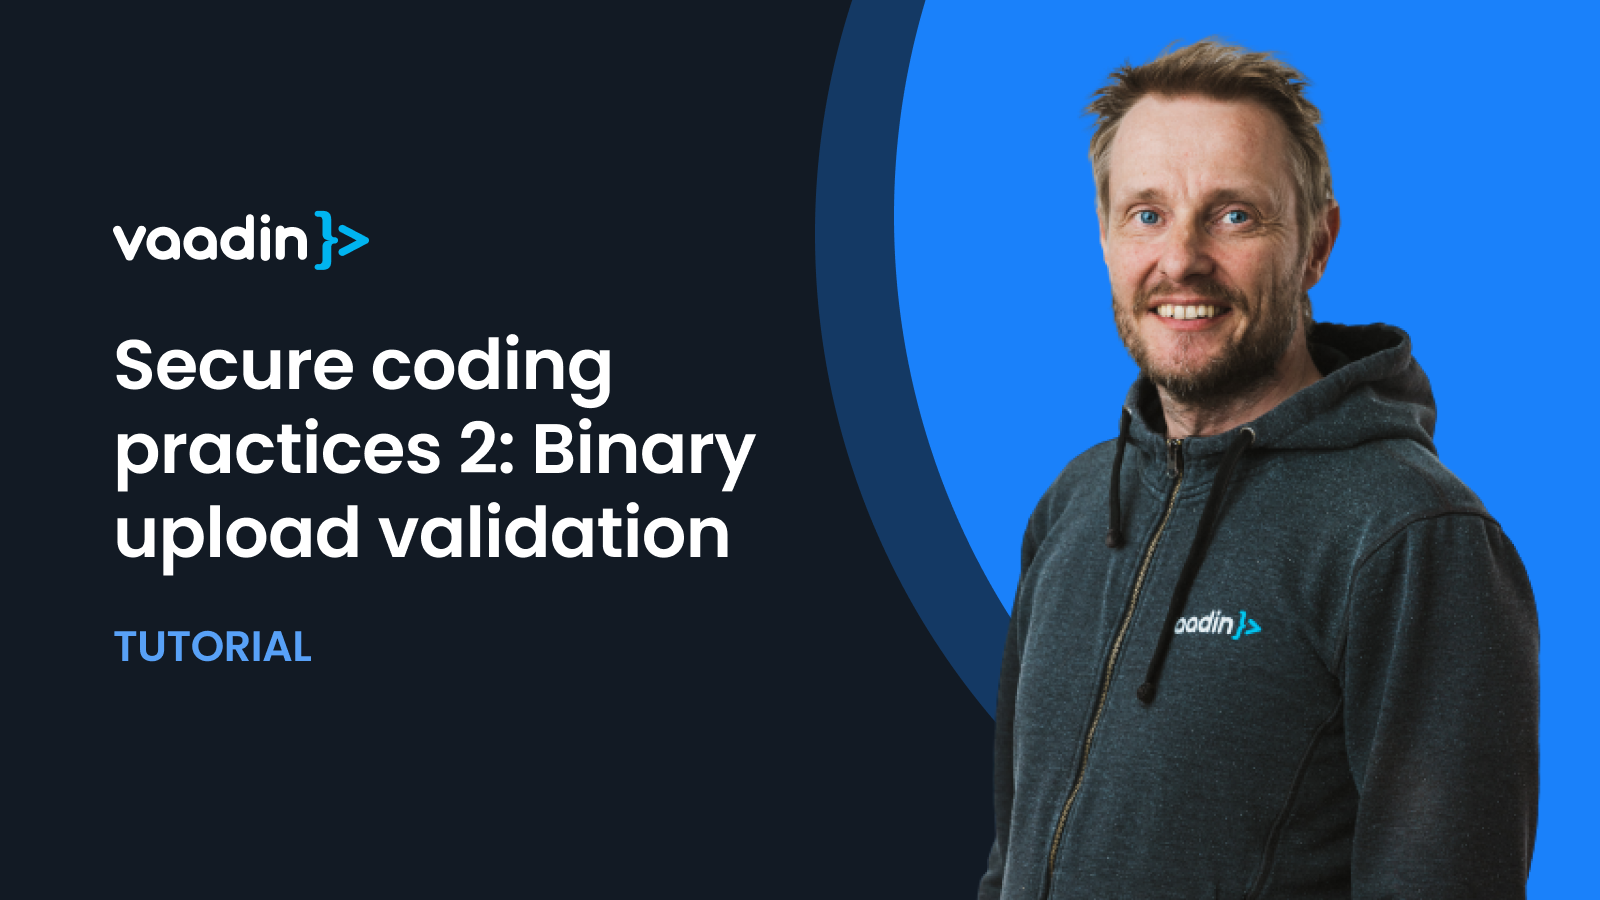 Secure Coding practices 2: Binary upload validation